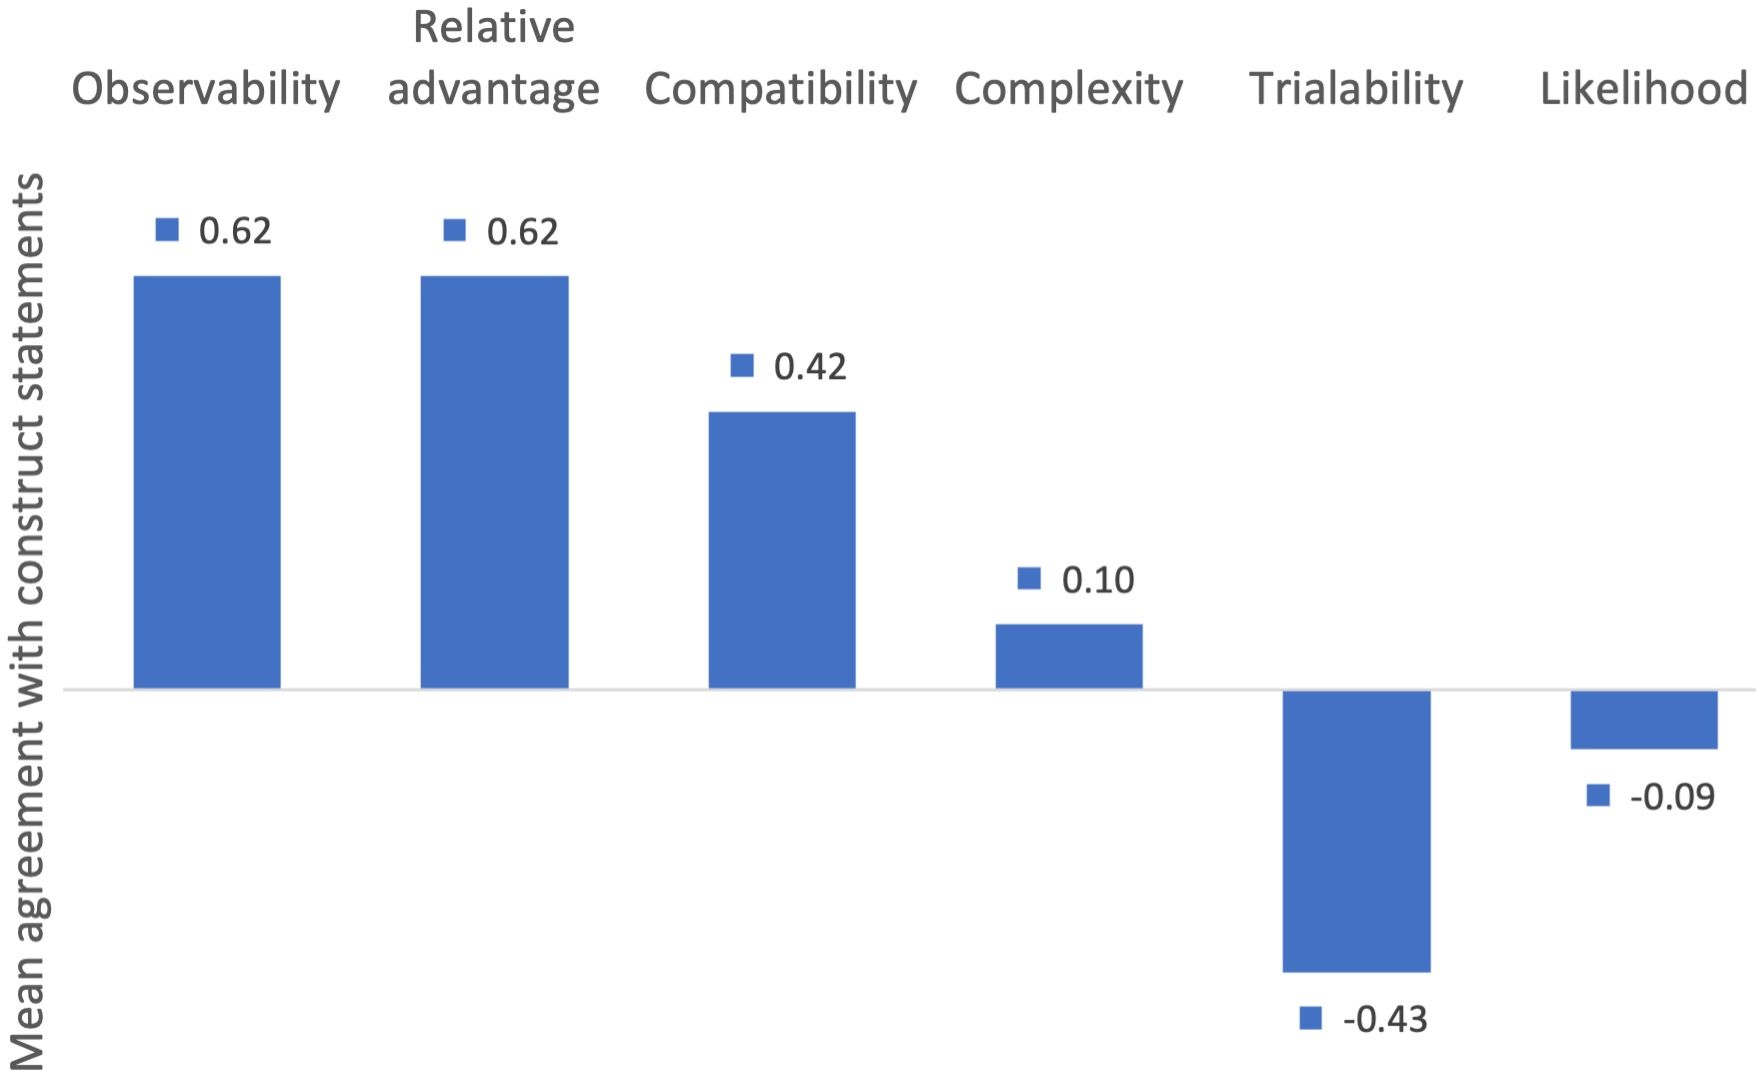 Perceptions of automated nursery technologies and likelihood of adoption from 189 nursery growers identified as being in higher level leadership positions. Note. All variables could range from -2 to +2. For relative advantage, compatibility, complexity, trialability, and observability, values of -2 would indicate strong disagreement or negative perceptions of that trait while values approaching +2 would indicate strong agreement or positive perceptions of that trait. For likelihood, values close to -2 would indicate low likelihood of adoption and values close to +2 would indicate high likelihood of adoption. 